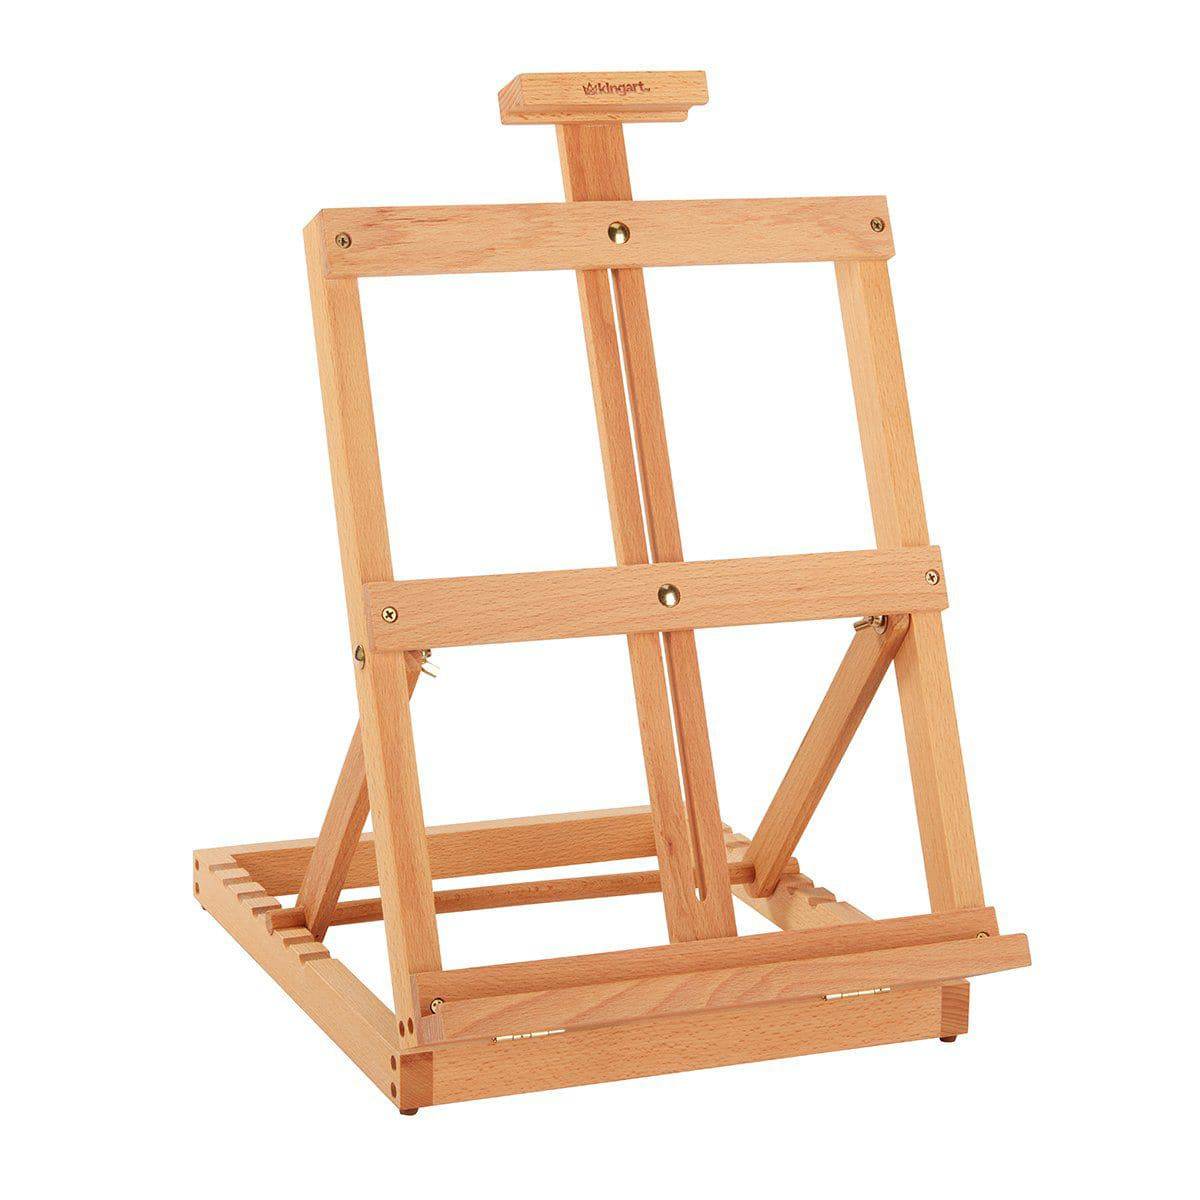 1.5 M Wooden Easel Hire - Artists Easel - BE Event Hire